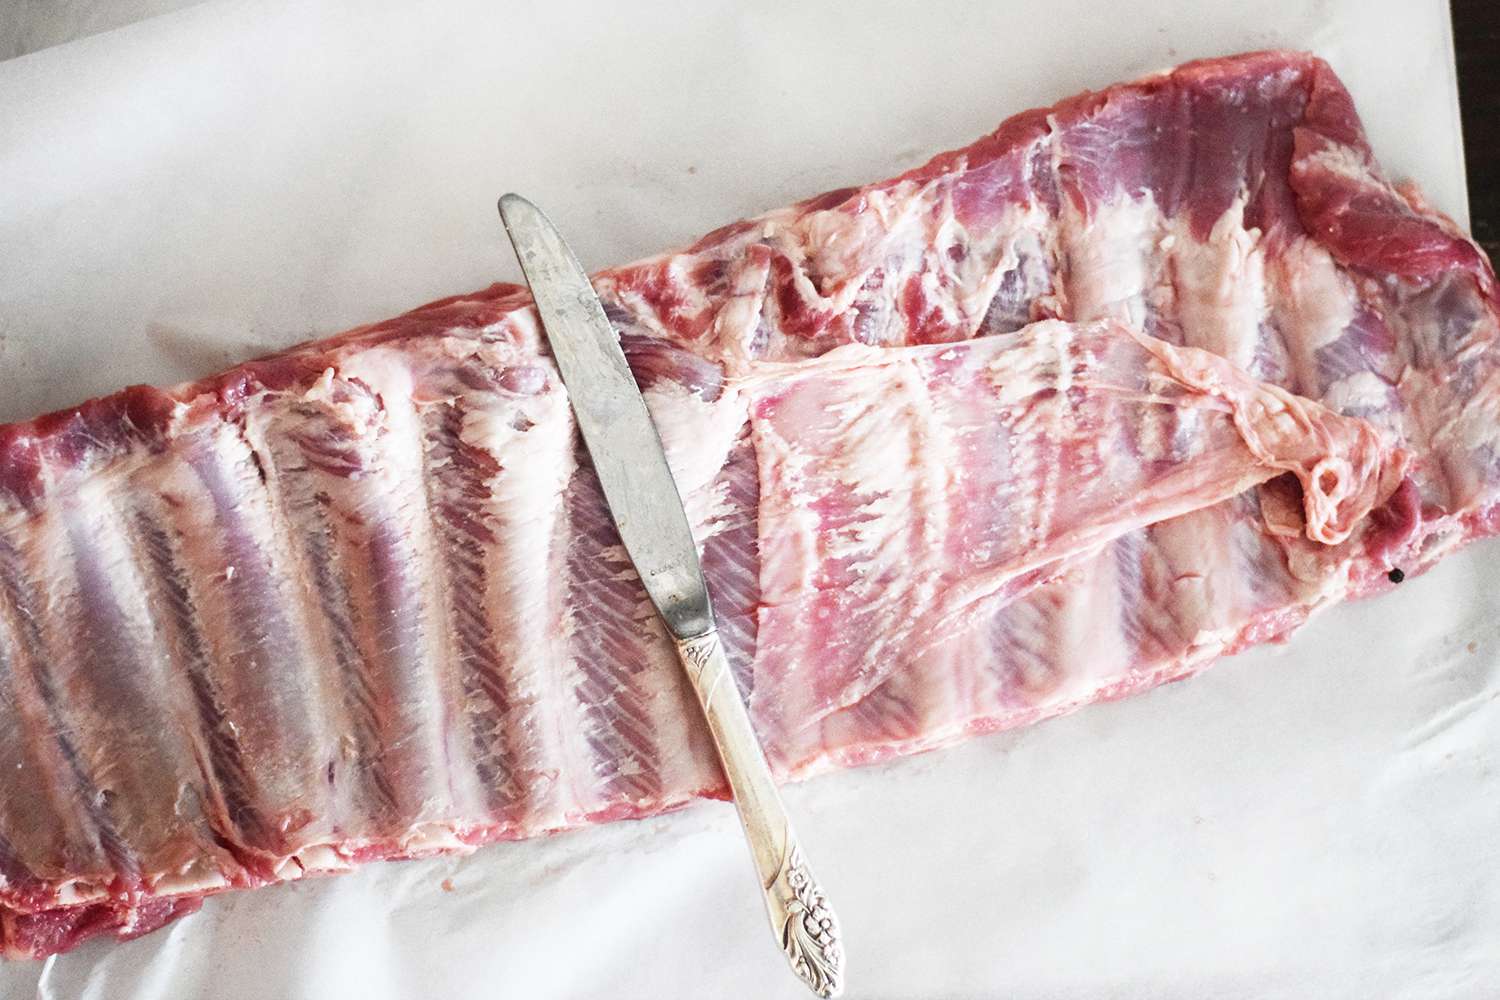 how-to-cut-ribs-before-cooking